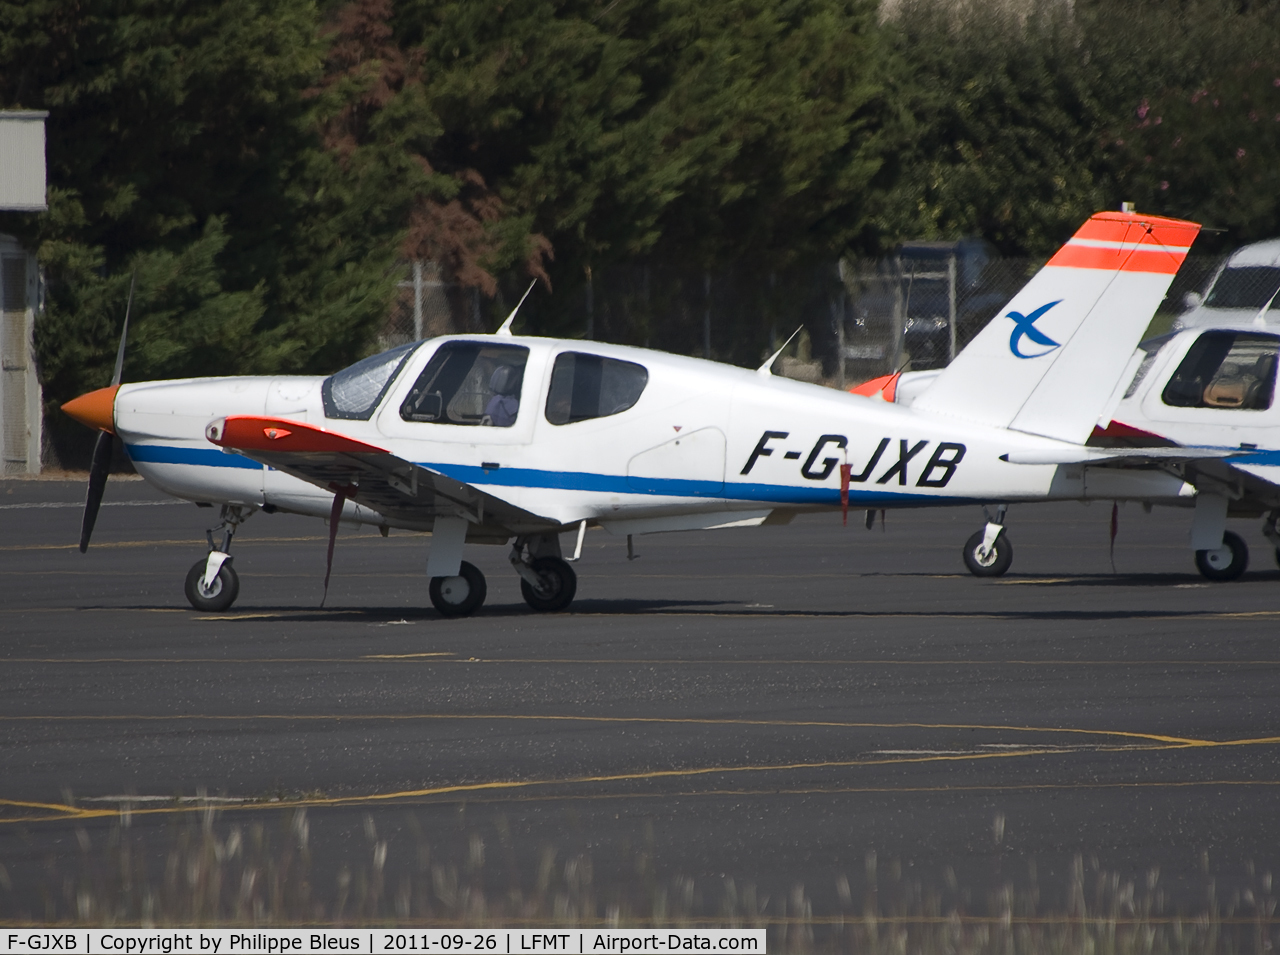 F-GJXB, 1991 Socata TB-20 C/N 1304, Parking position at Montpellier Air Training, shortly after flight.